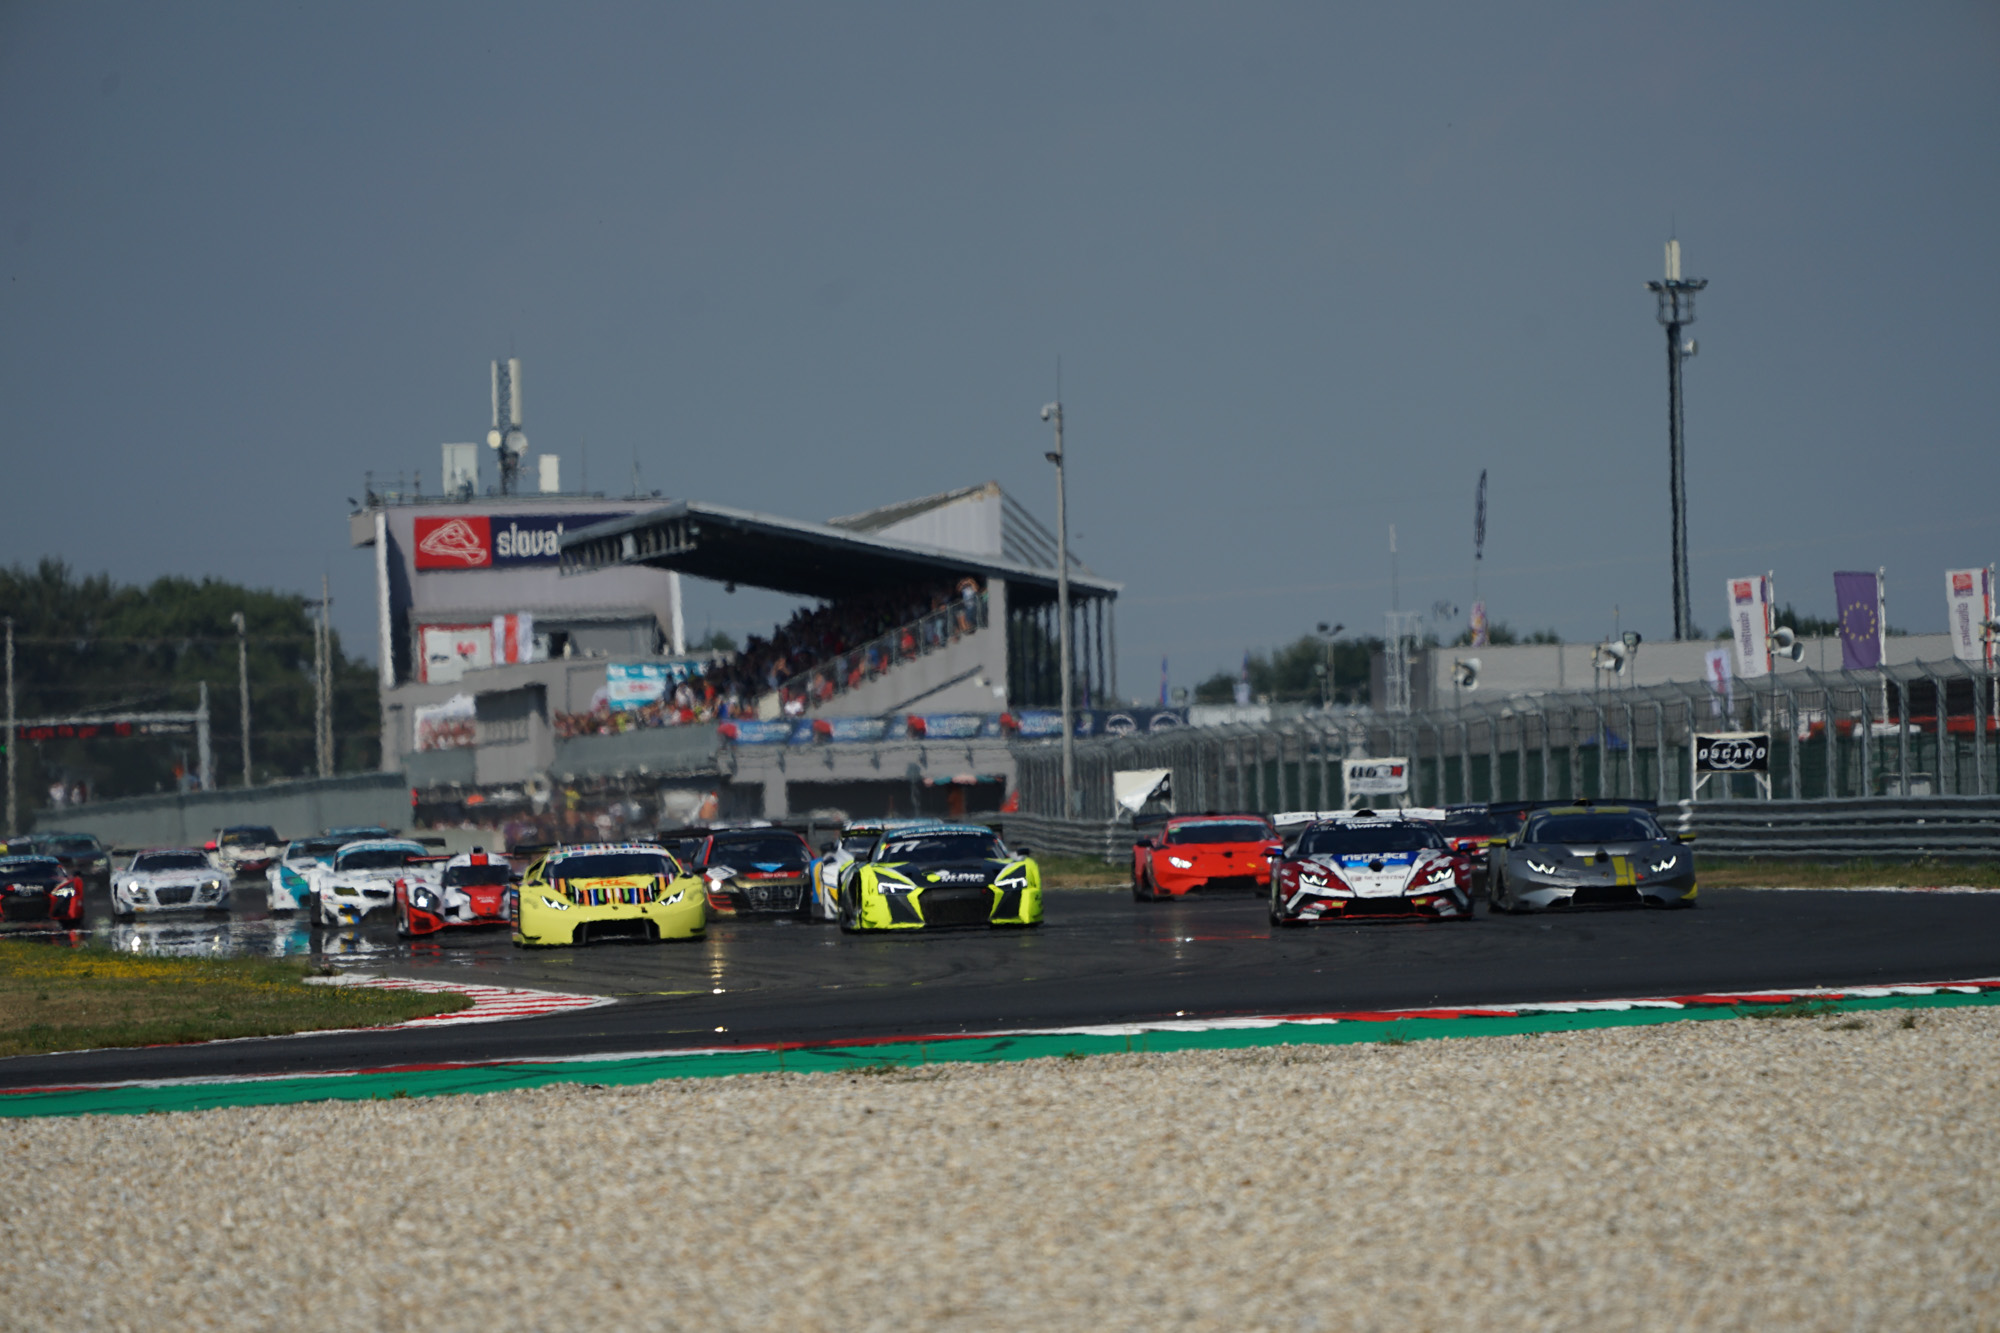 Still a plenty to fight for in the Endurance series